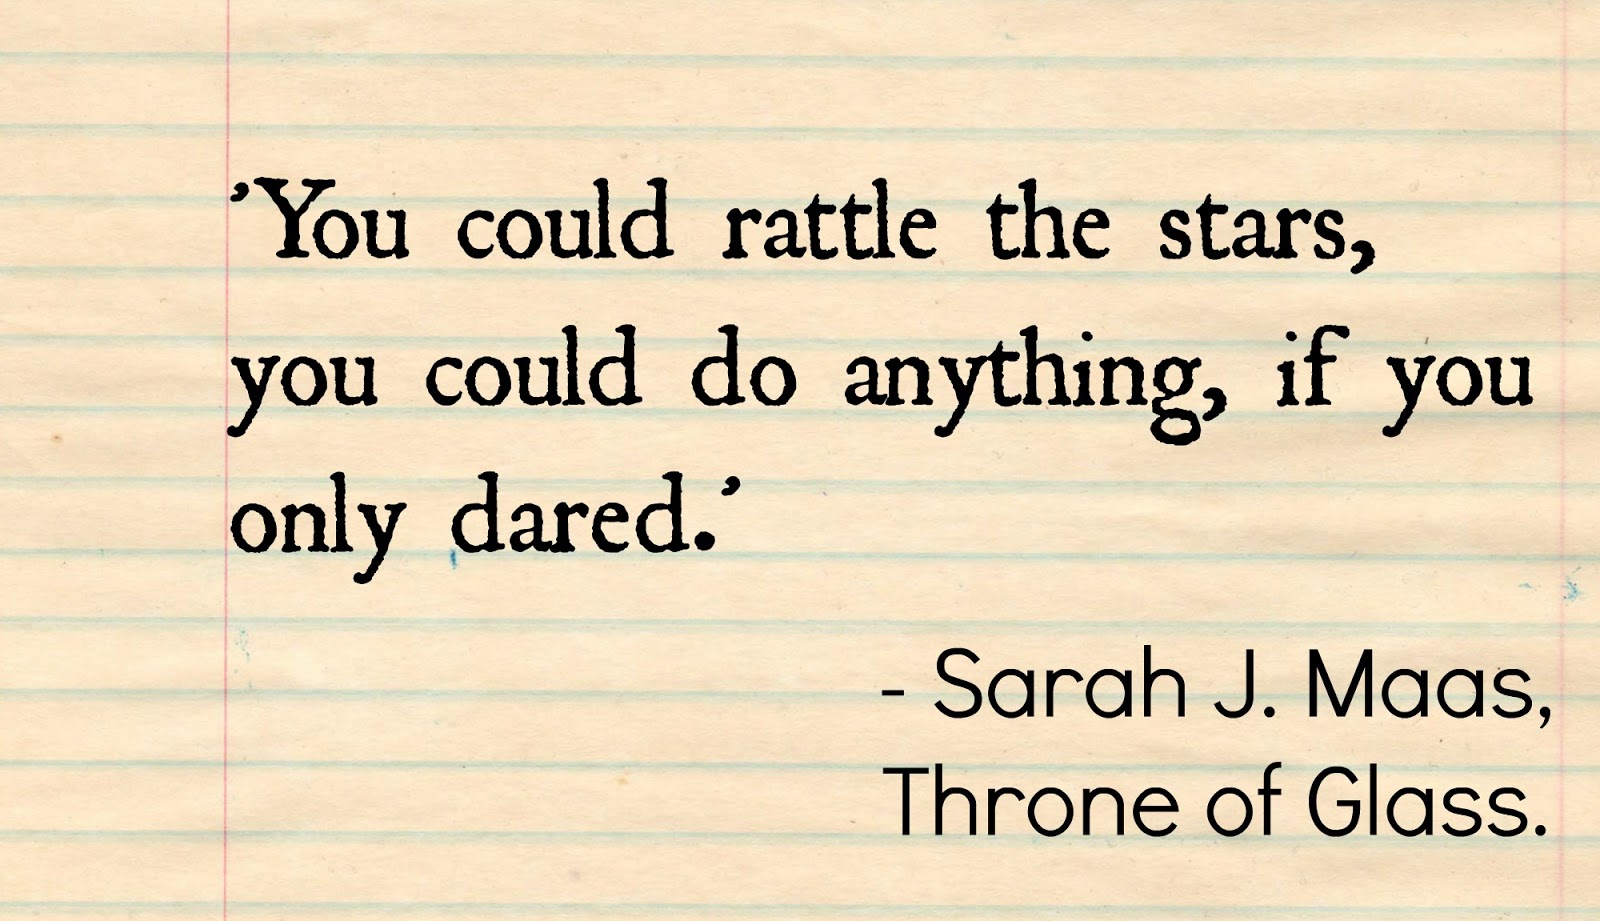 Throne Of Glass Quotes 188245 - Throne Of Glass Phrases , HD Wallpaper & Backgrounds